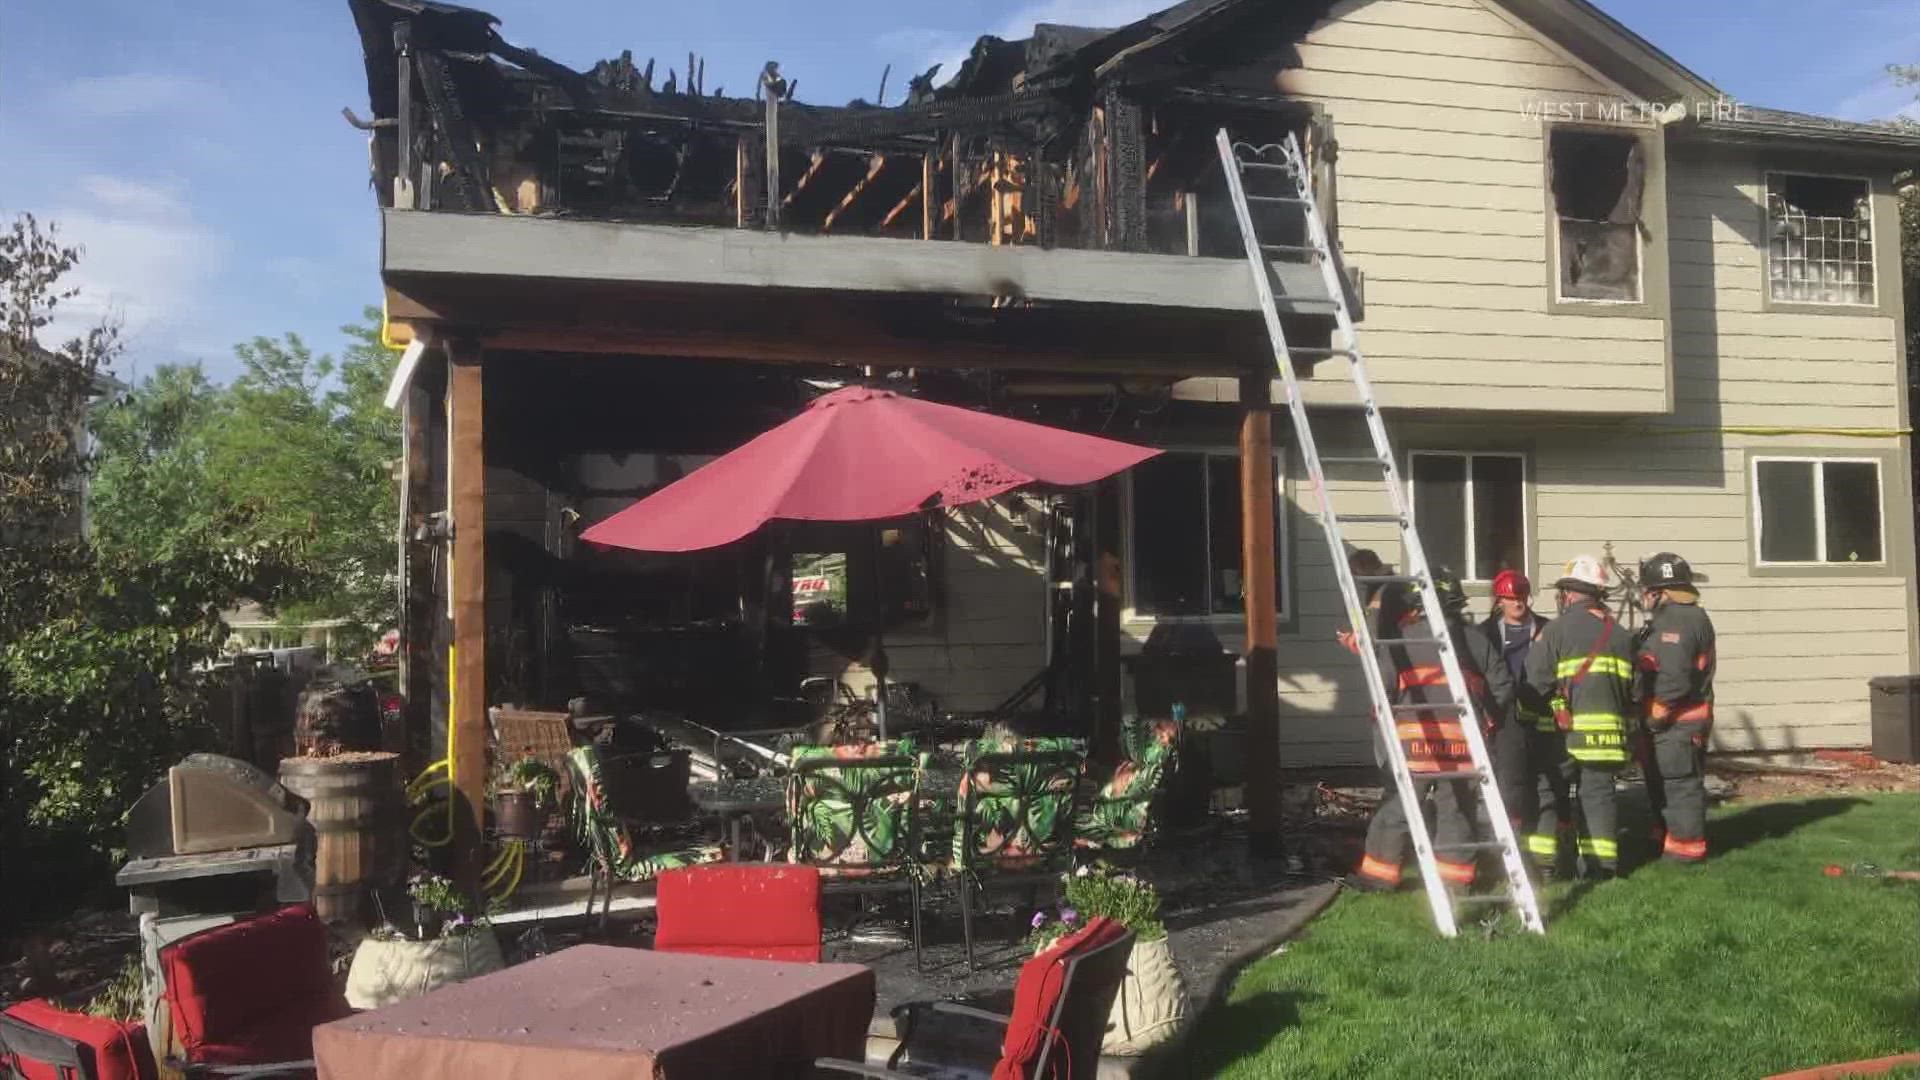 West Metro Fire Rescue said the fire started at a home in the 12100 block of West Copper Drive on Sunday morning.